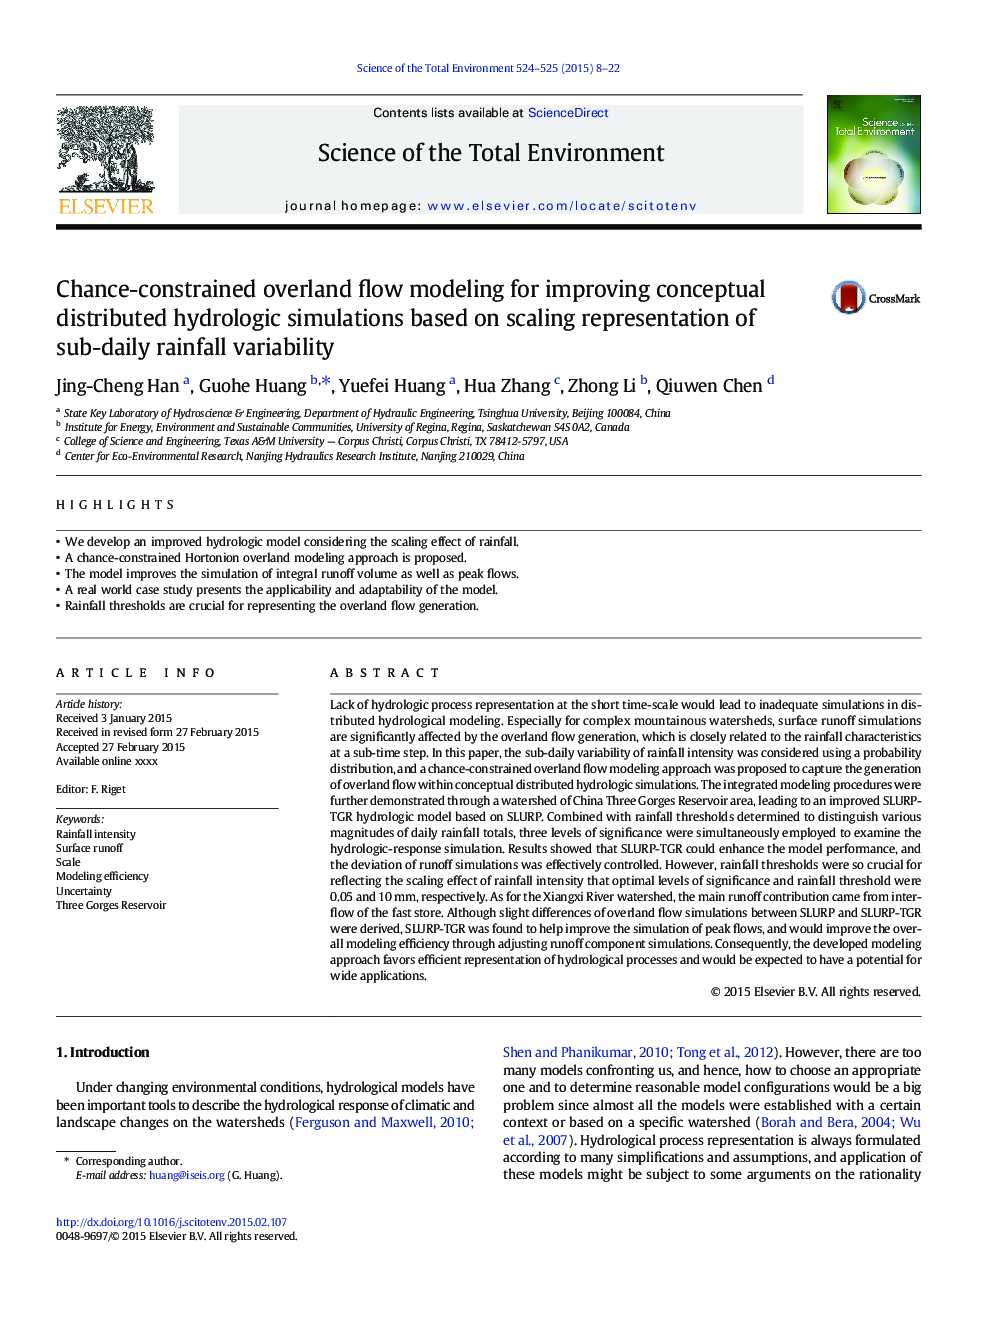 Chance-constrained overland flow modeling for improving conceptual distributed hydrologic simulations based on scaling representation of sub-daily rainfall variability